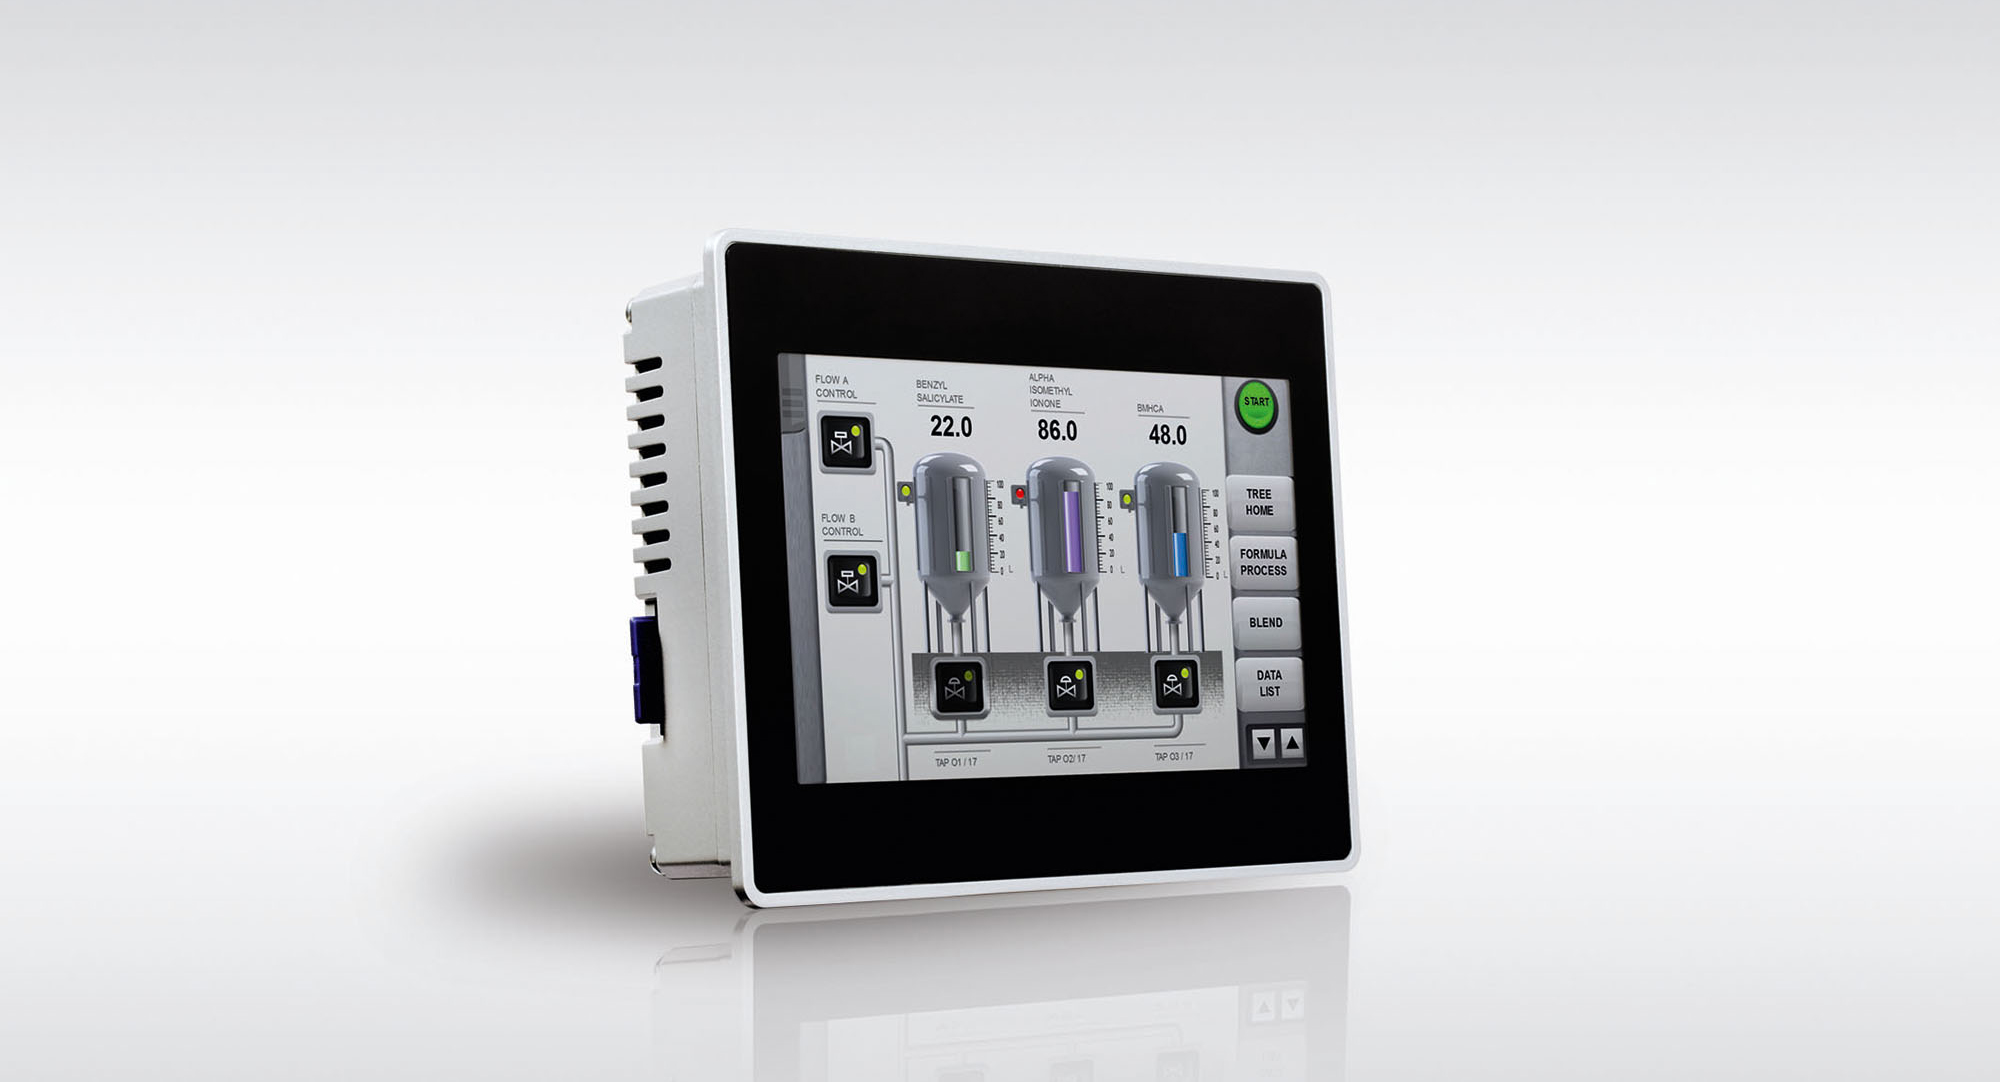 hmi-with-codesys-3-plc-and-visualization-from-turck